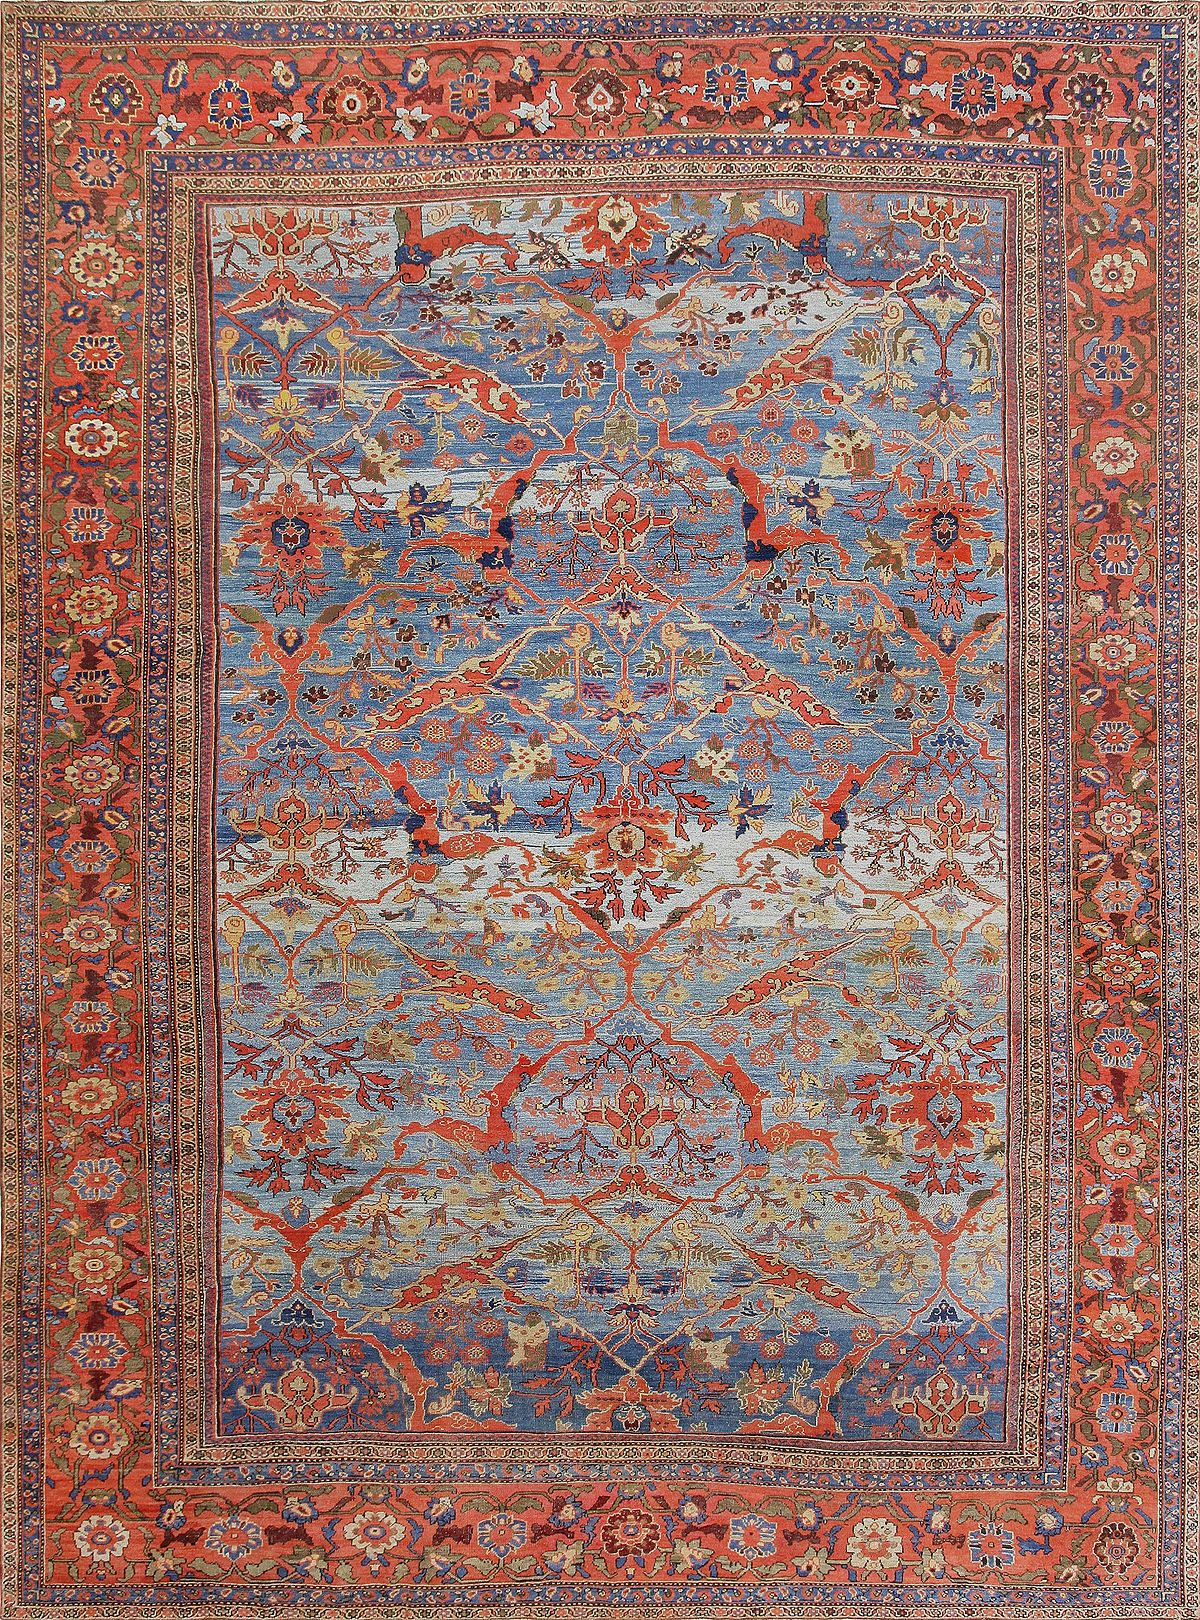 Sultanabad rugs and carpets - Wikipedia